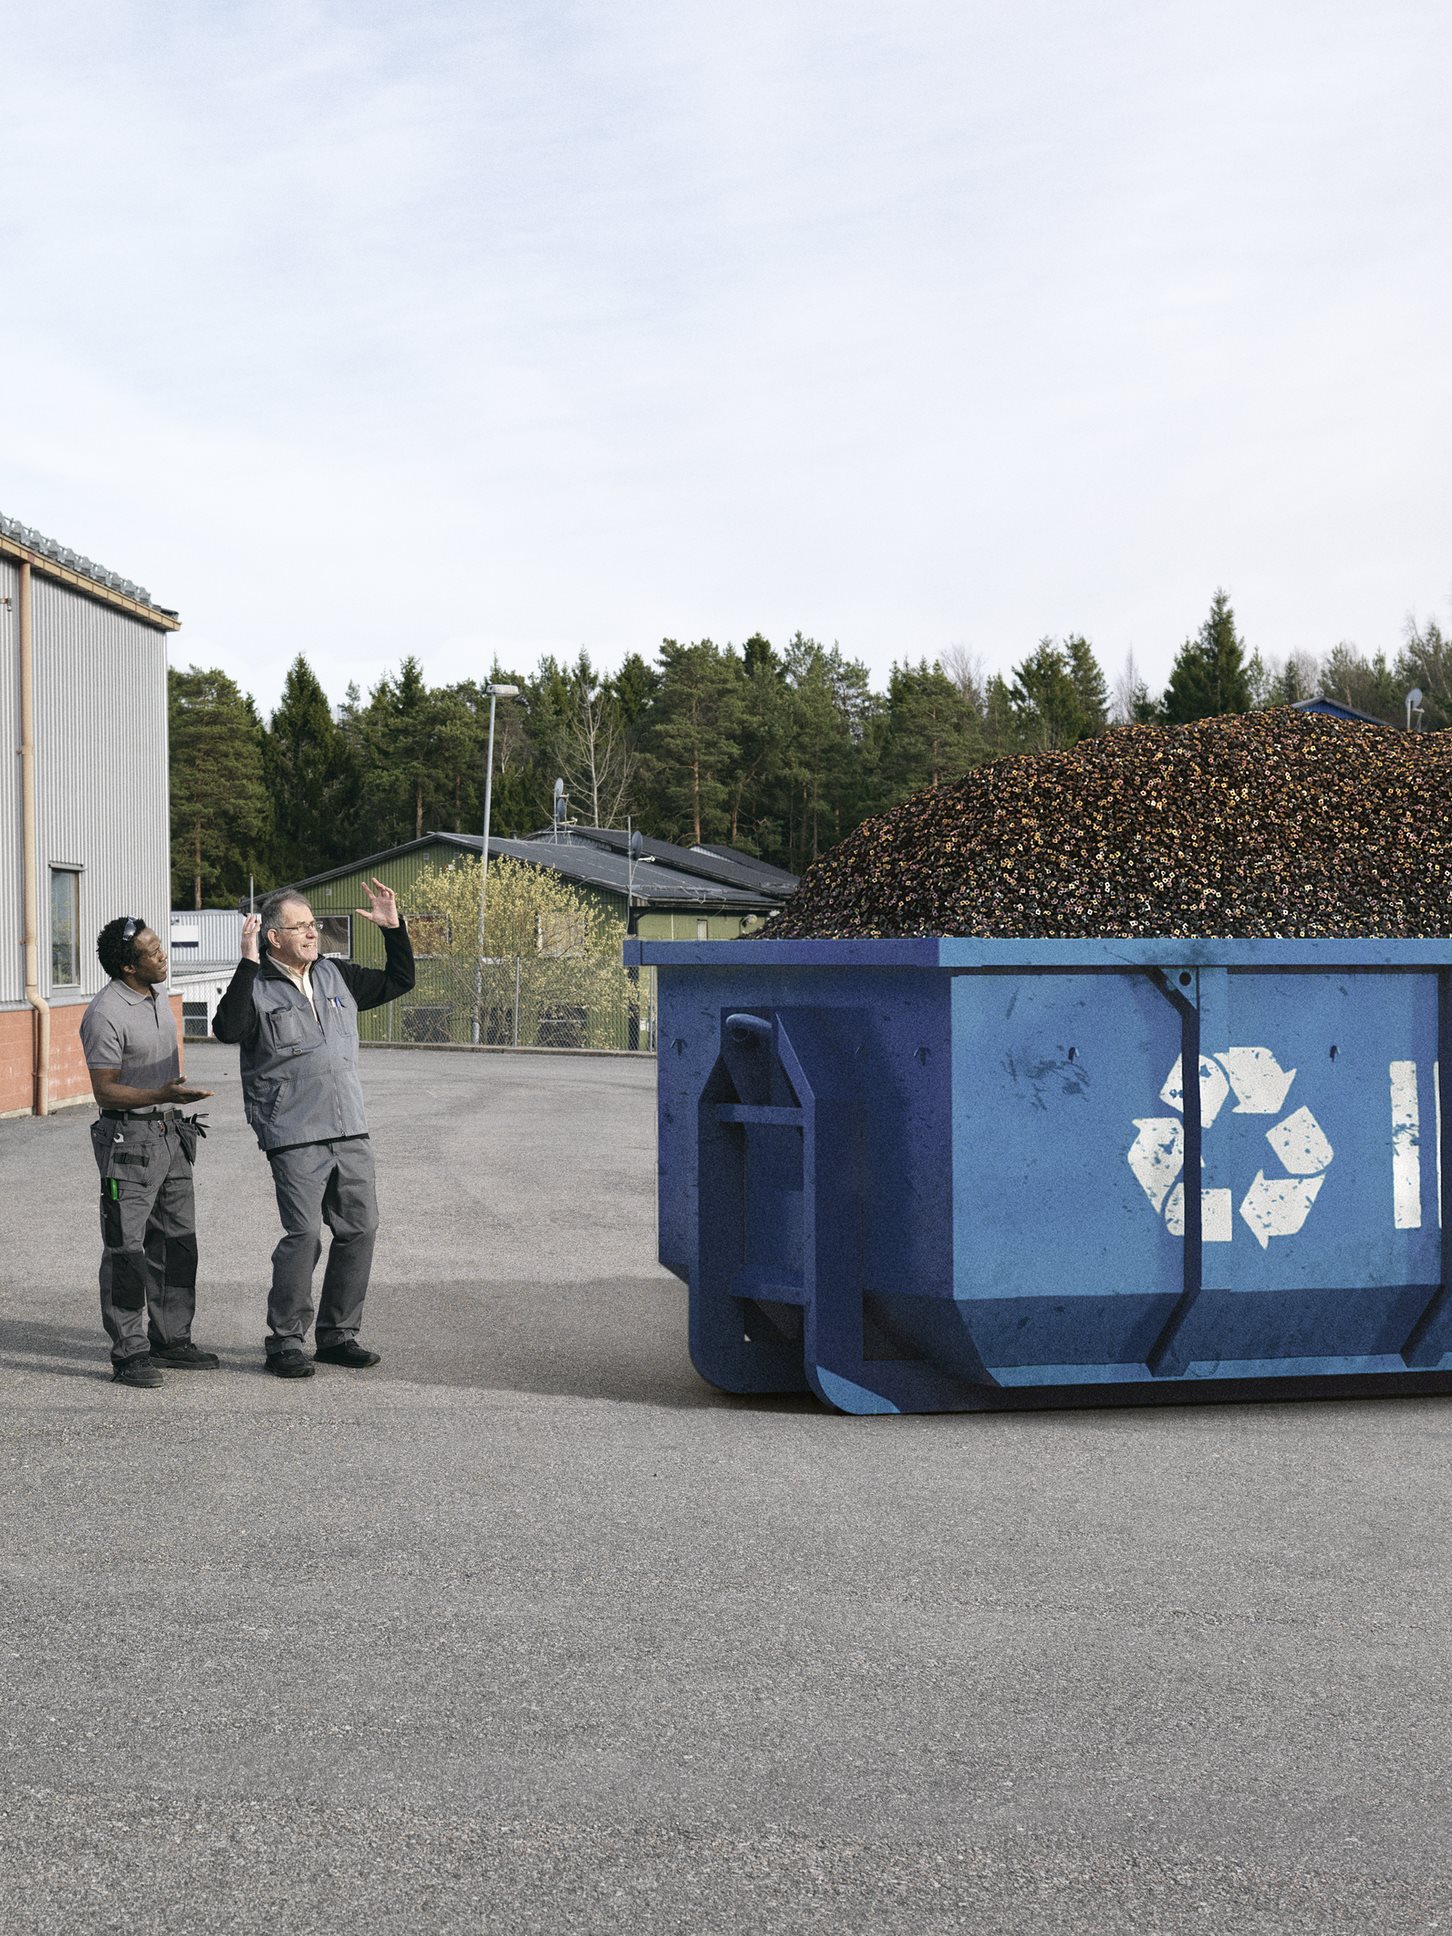 People_Standing_In_Front_Of_Recycling_Container.tif